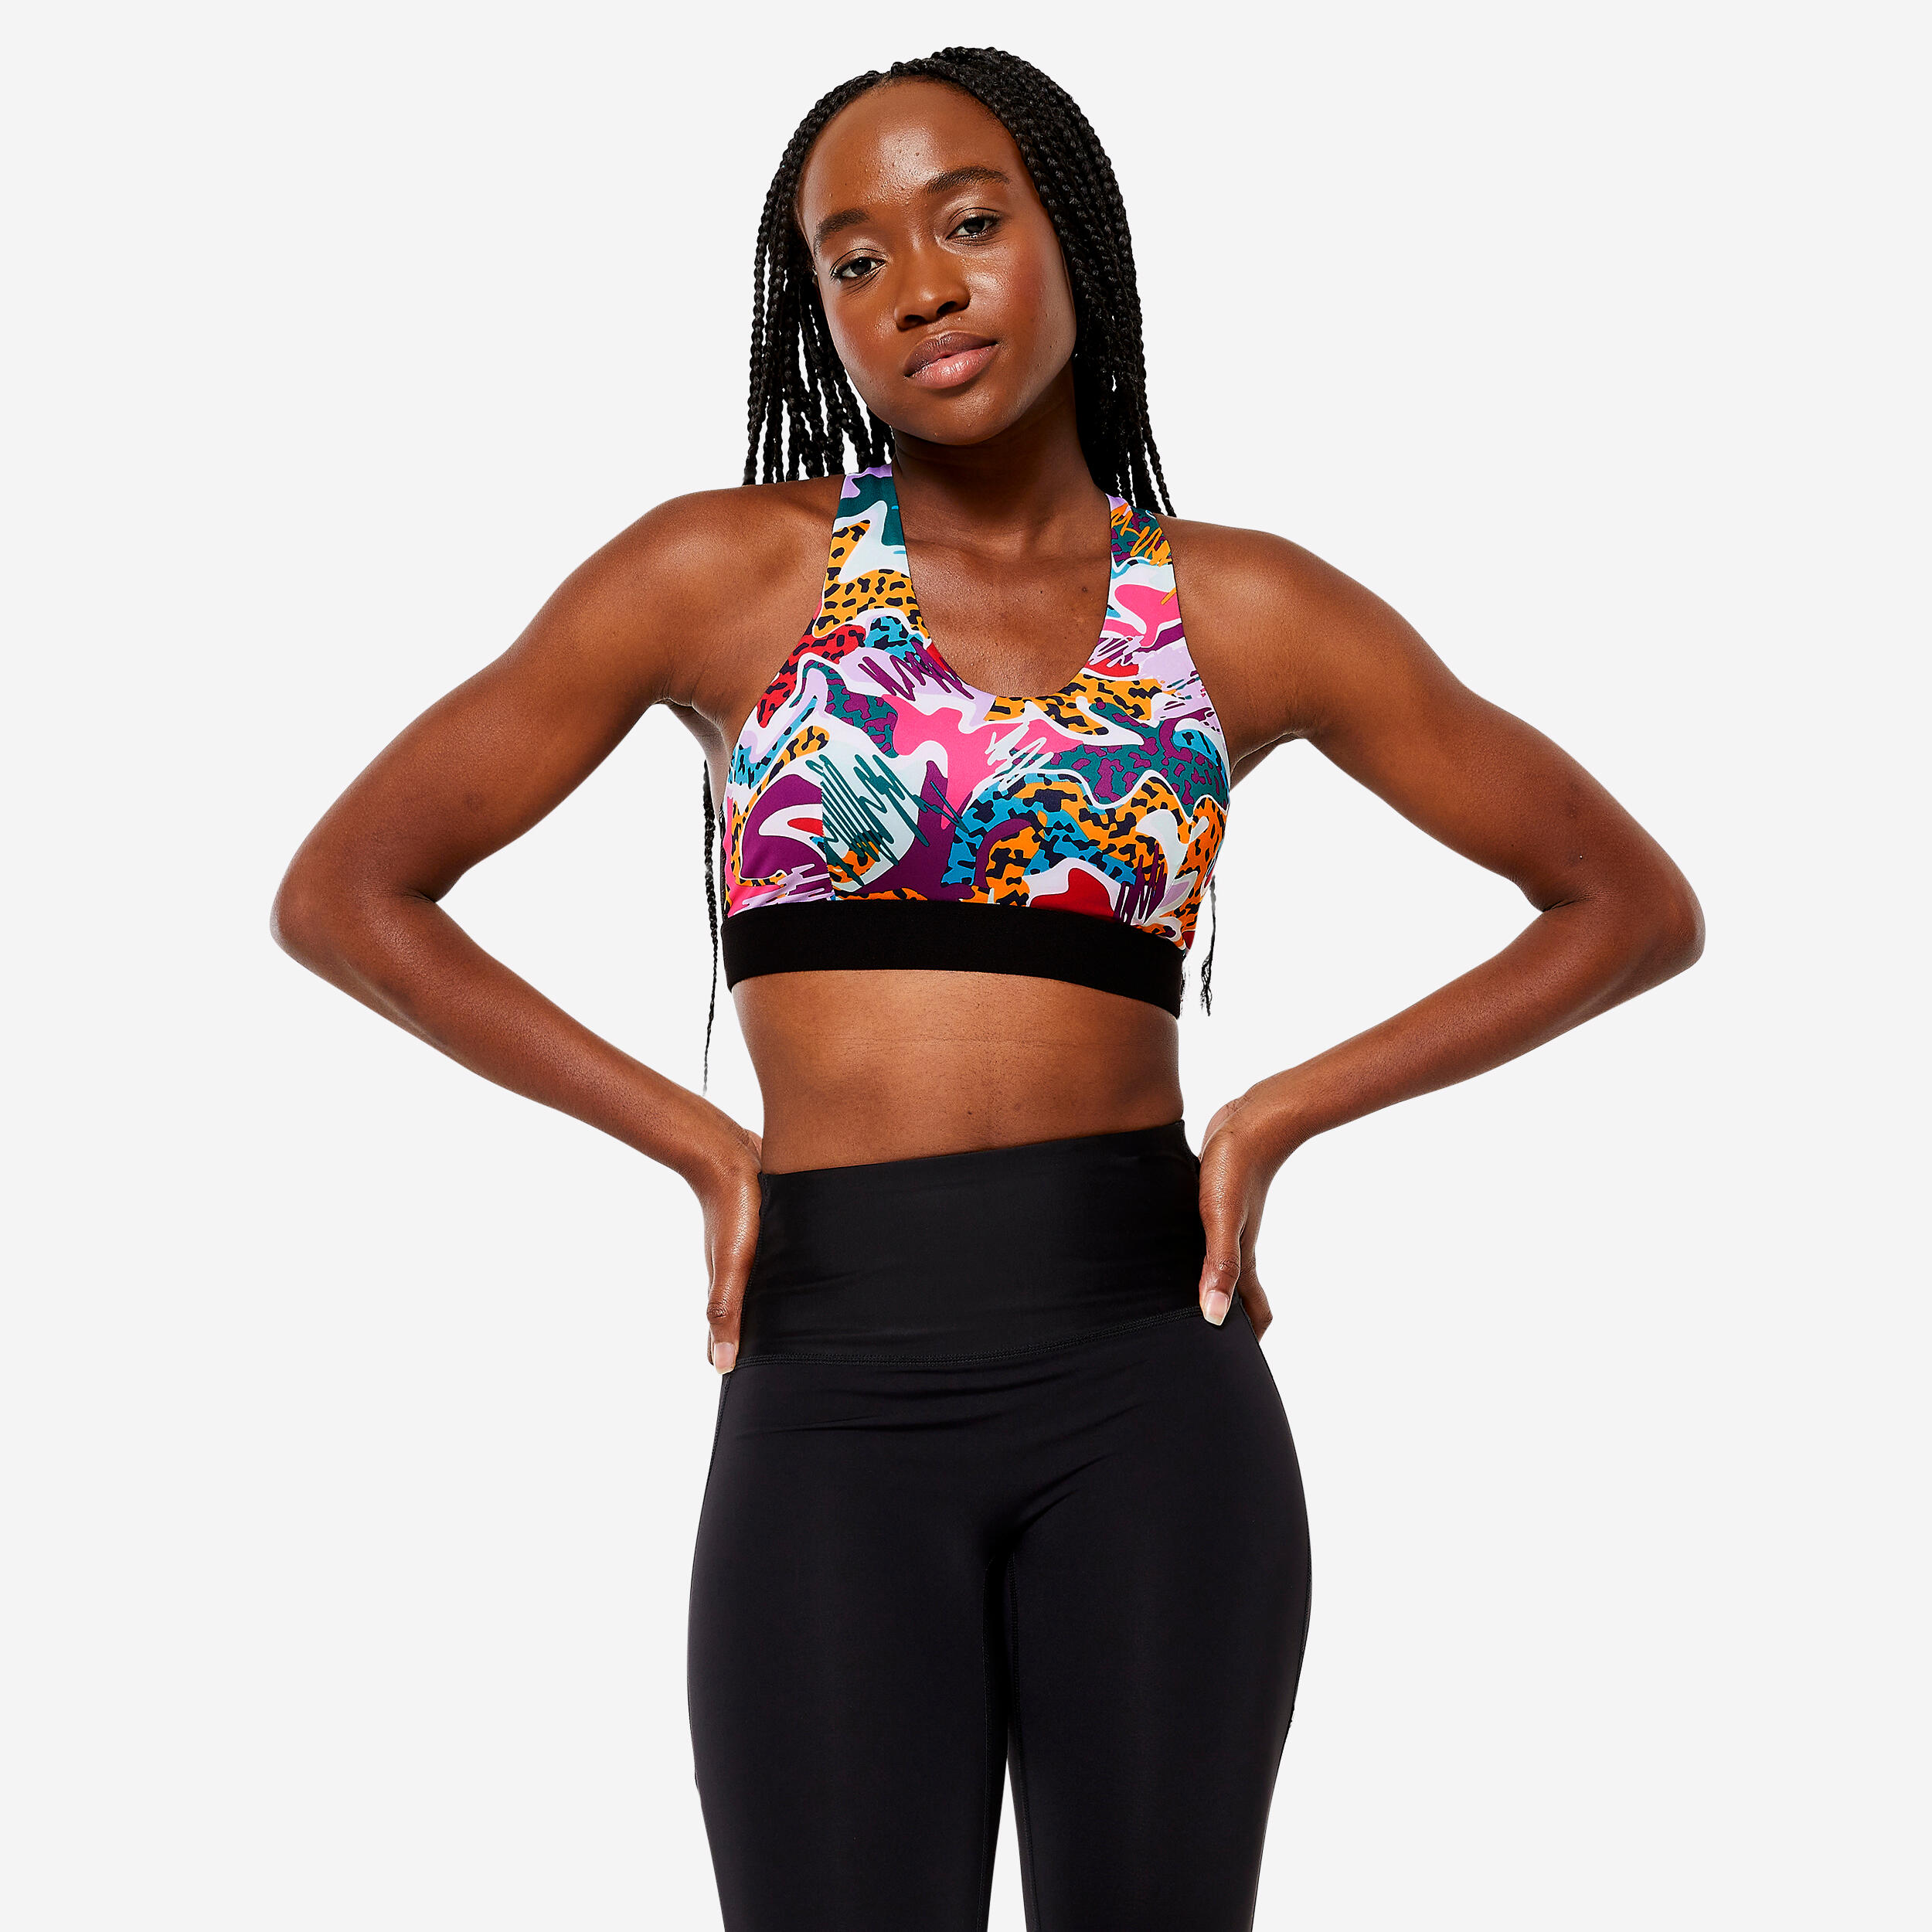 DOMYOS Women's Medium Support Racer Back Sports Bra with Cups - Multicoloured Prints